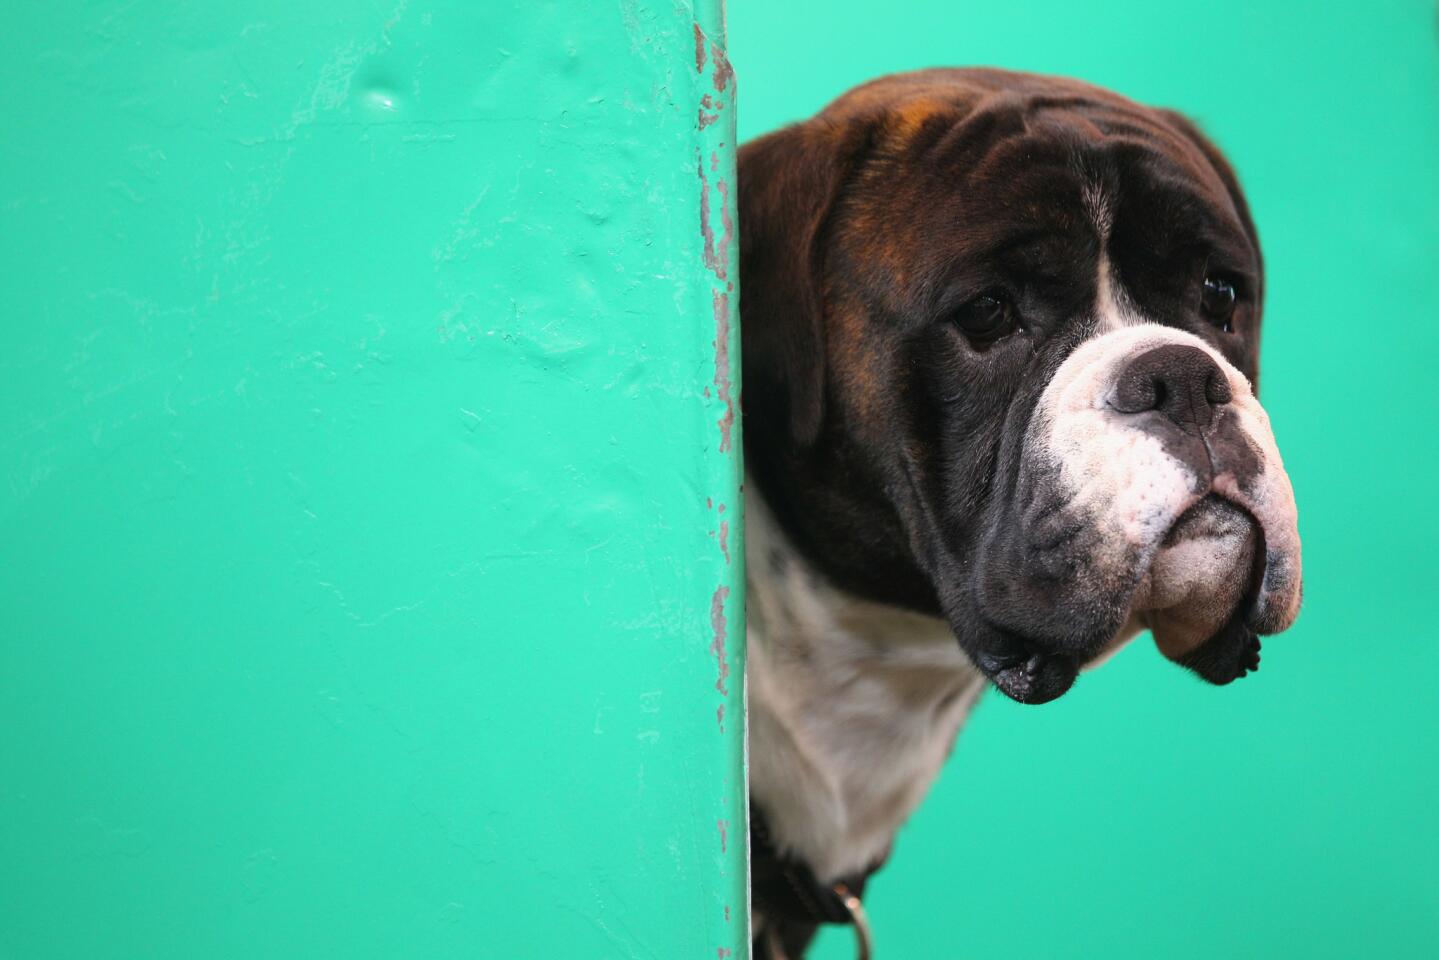 A boxer dog looks out of its stall at the Crufts dog show in Birmingham, England, in 2011.